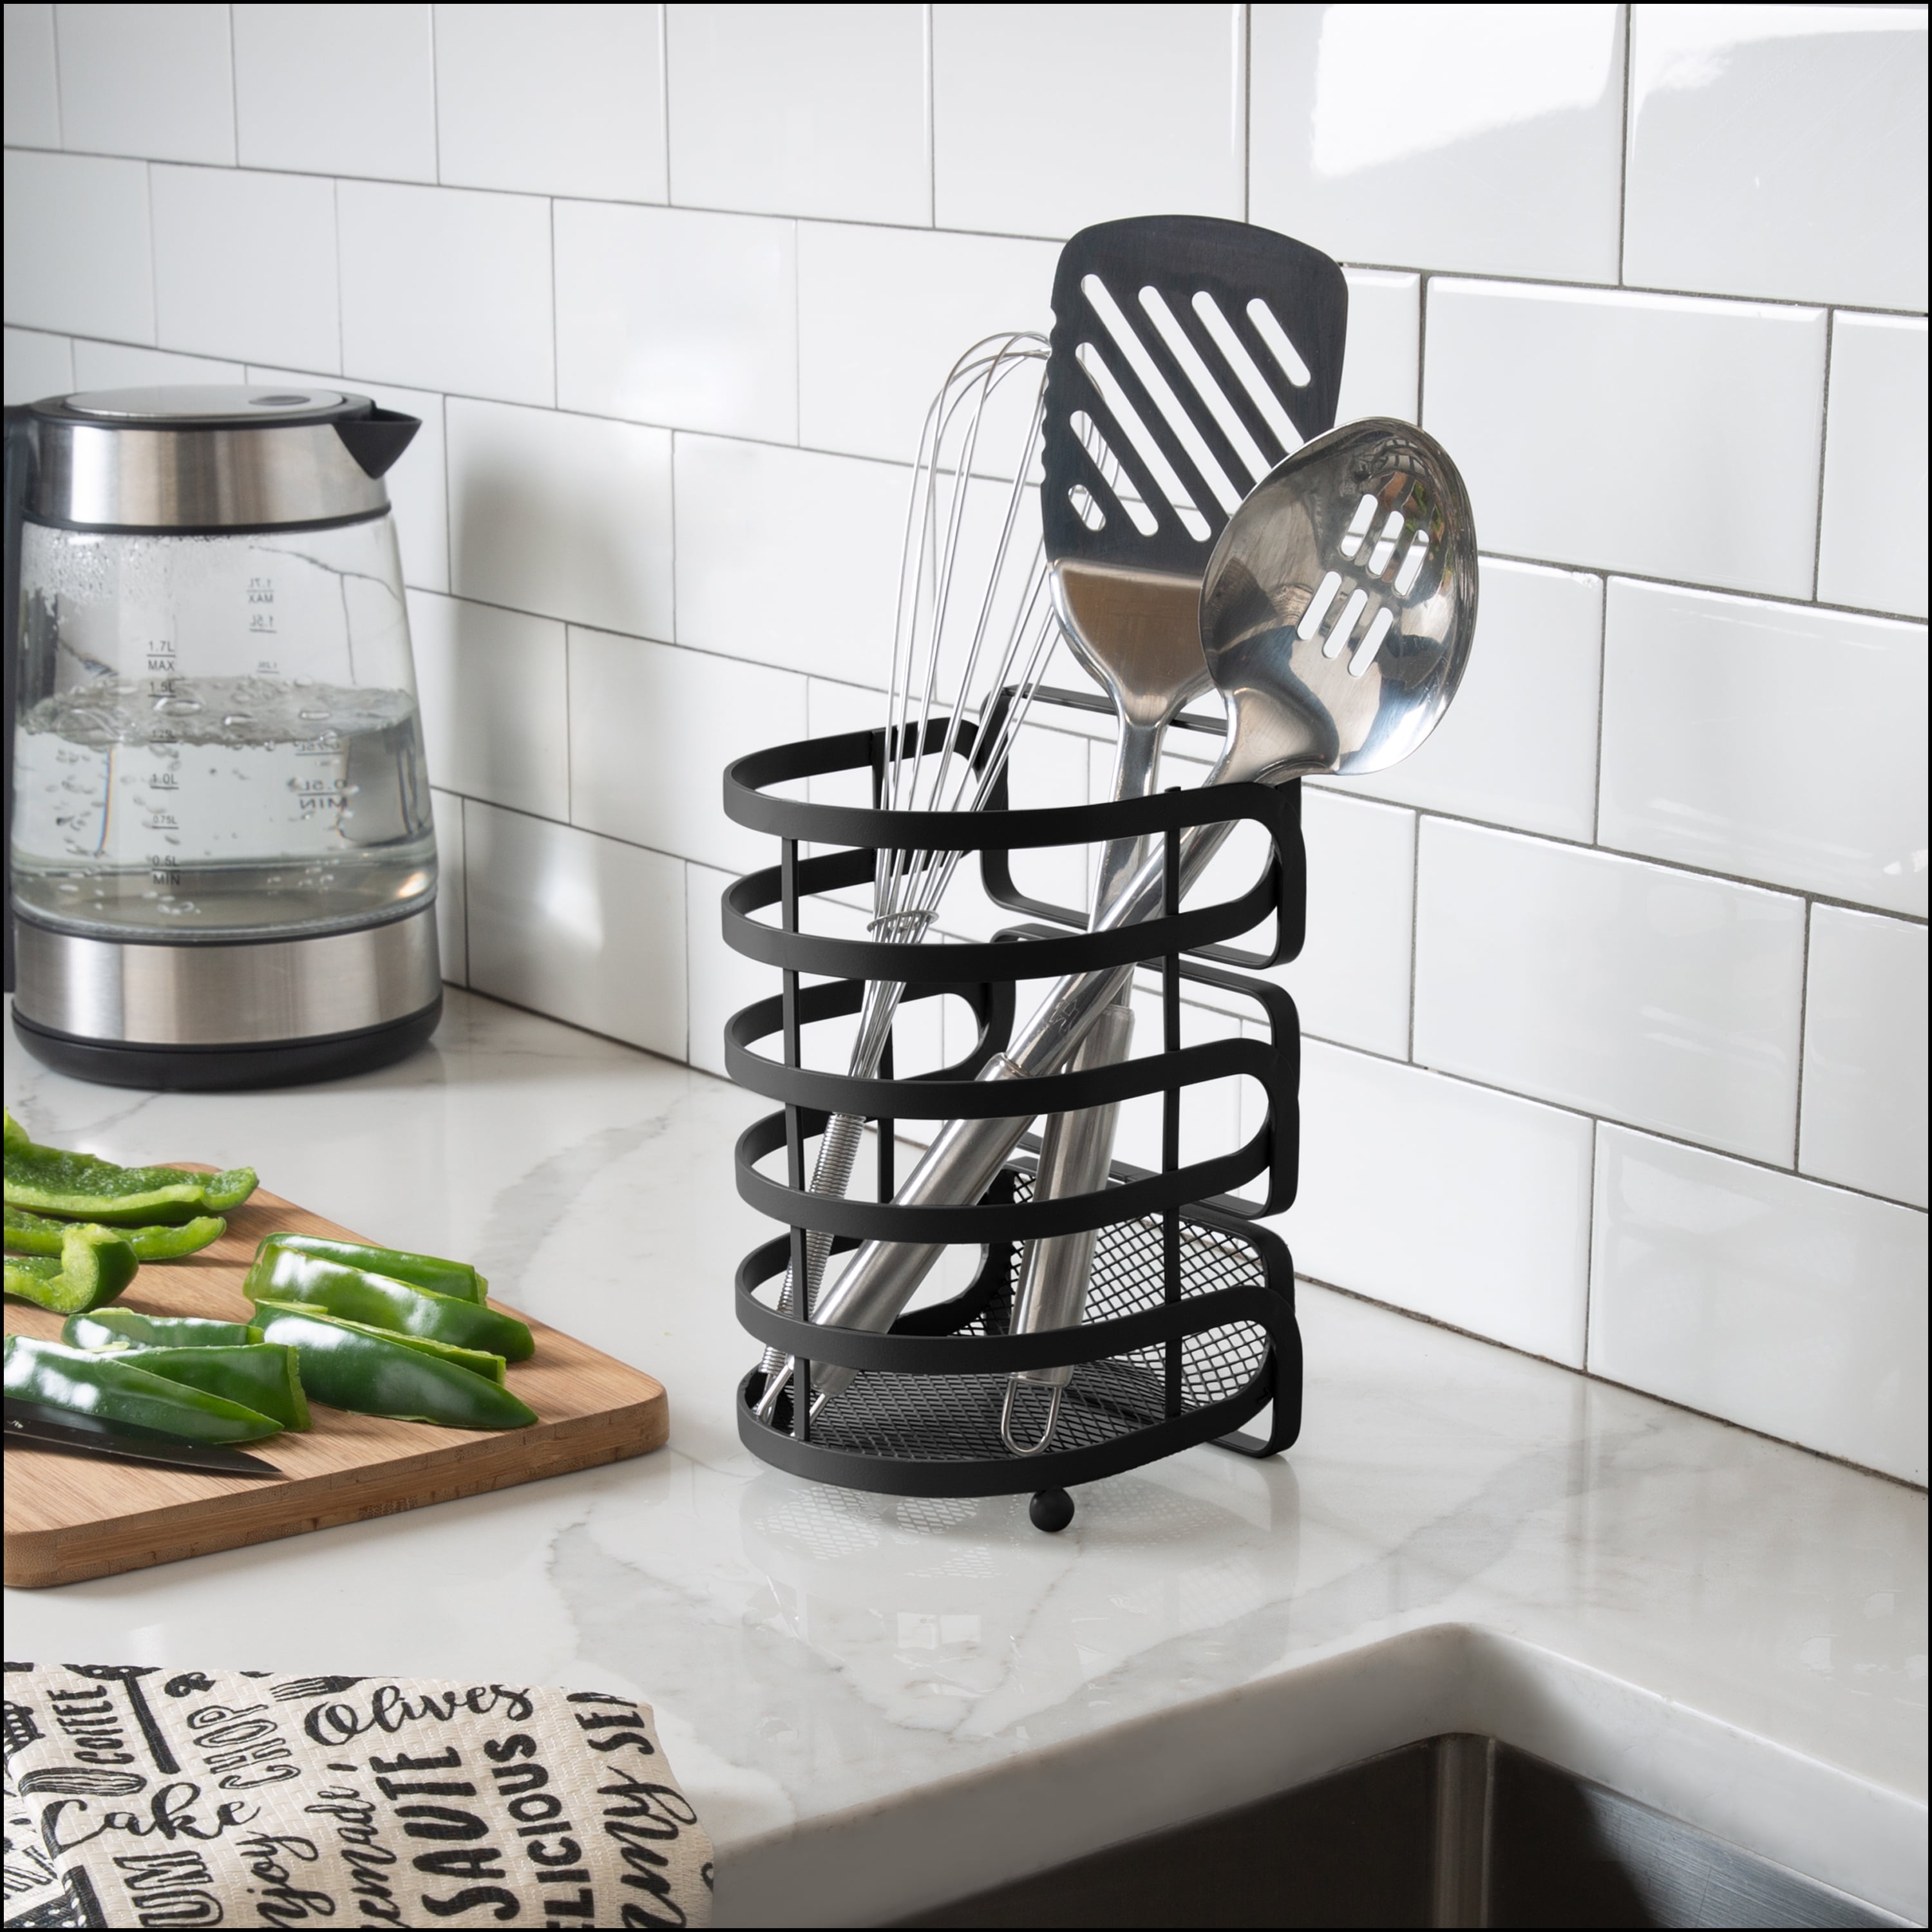 Kitchen Details Industrial Collection Cooking Utensil Basket in Matte Black, Size: 5.2 inch x 4.7 inch x 7.8 inch